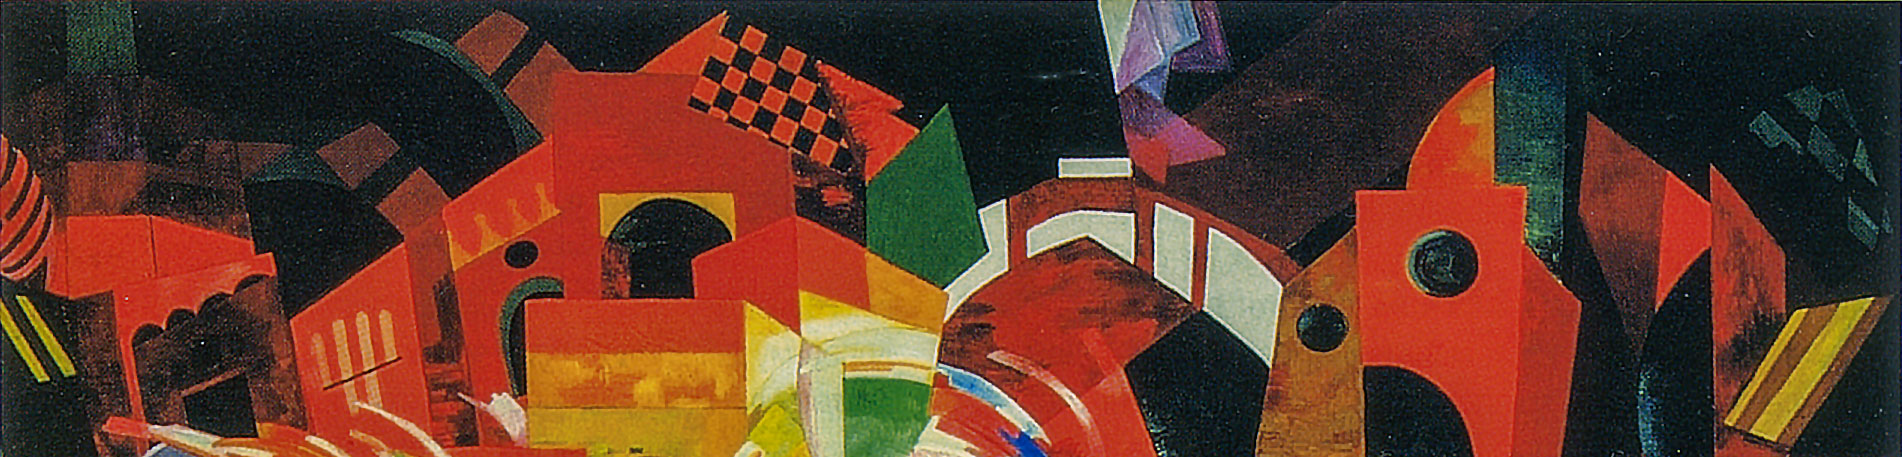 Police Break Up Suspected Forgery Ring about Russian Avant-Garde Art